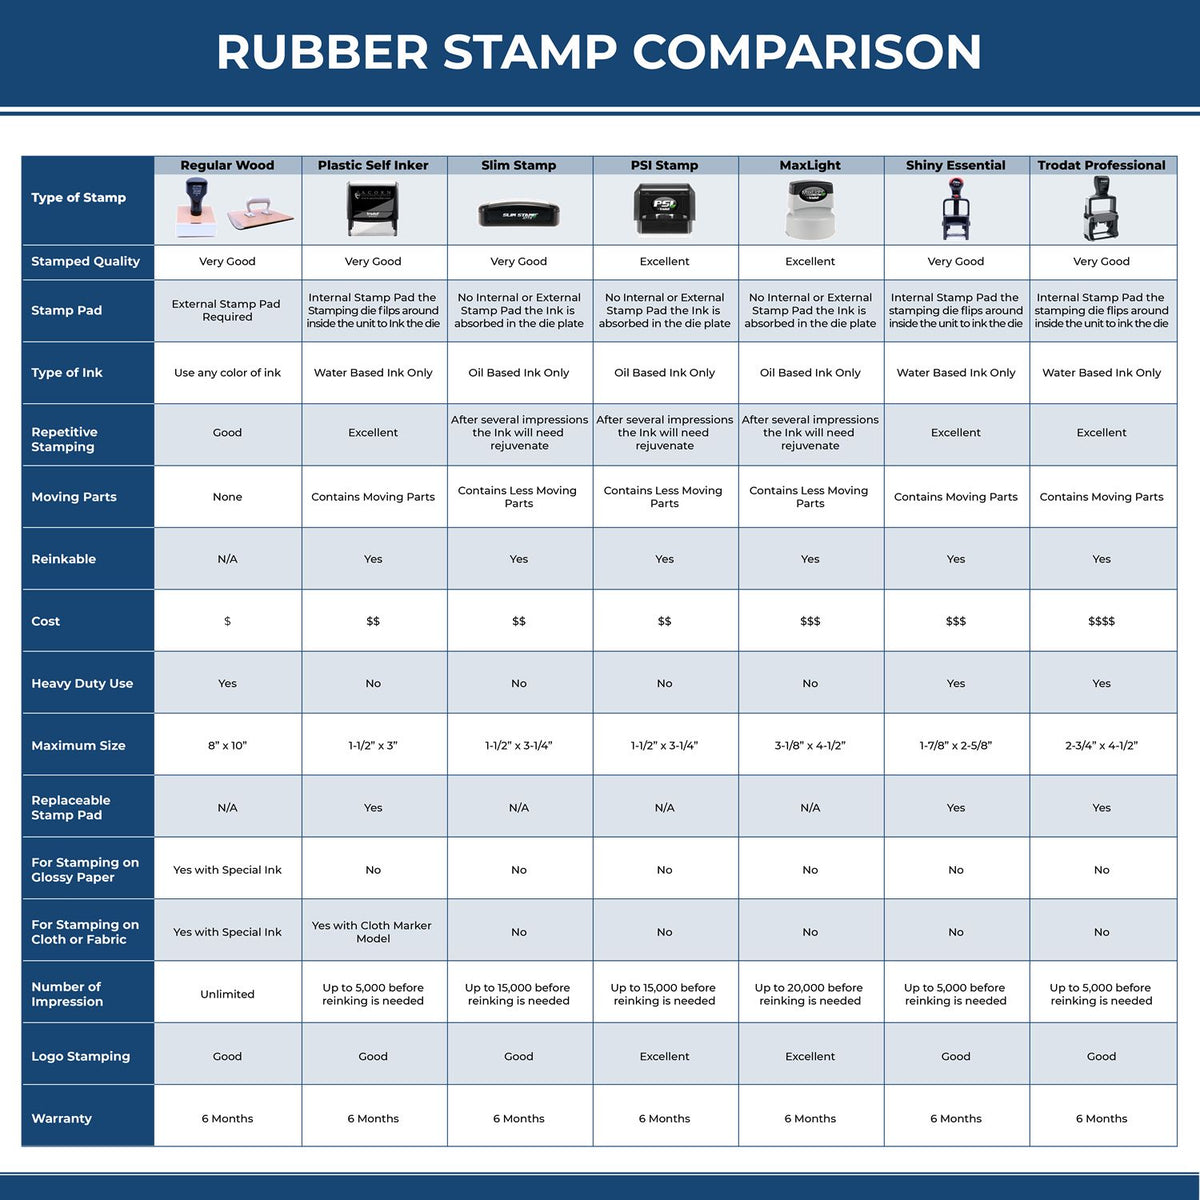 A comparison chart for the different types of mount models available for the Super Slim Vermont Notary Public Stamp.